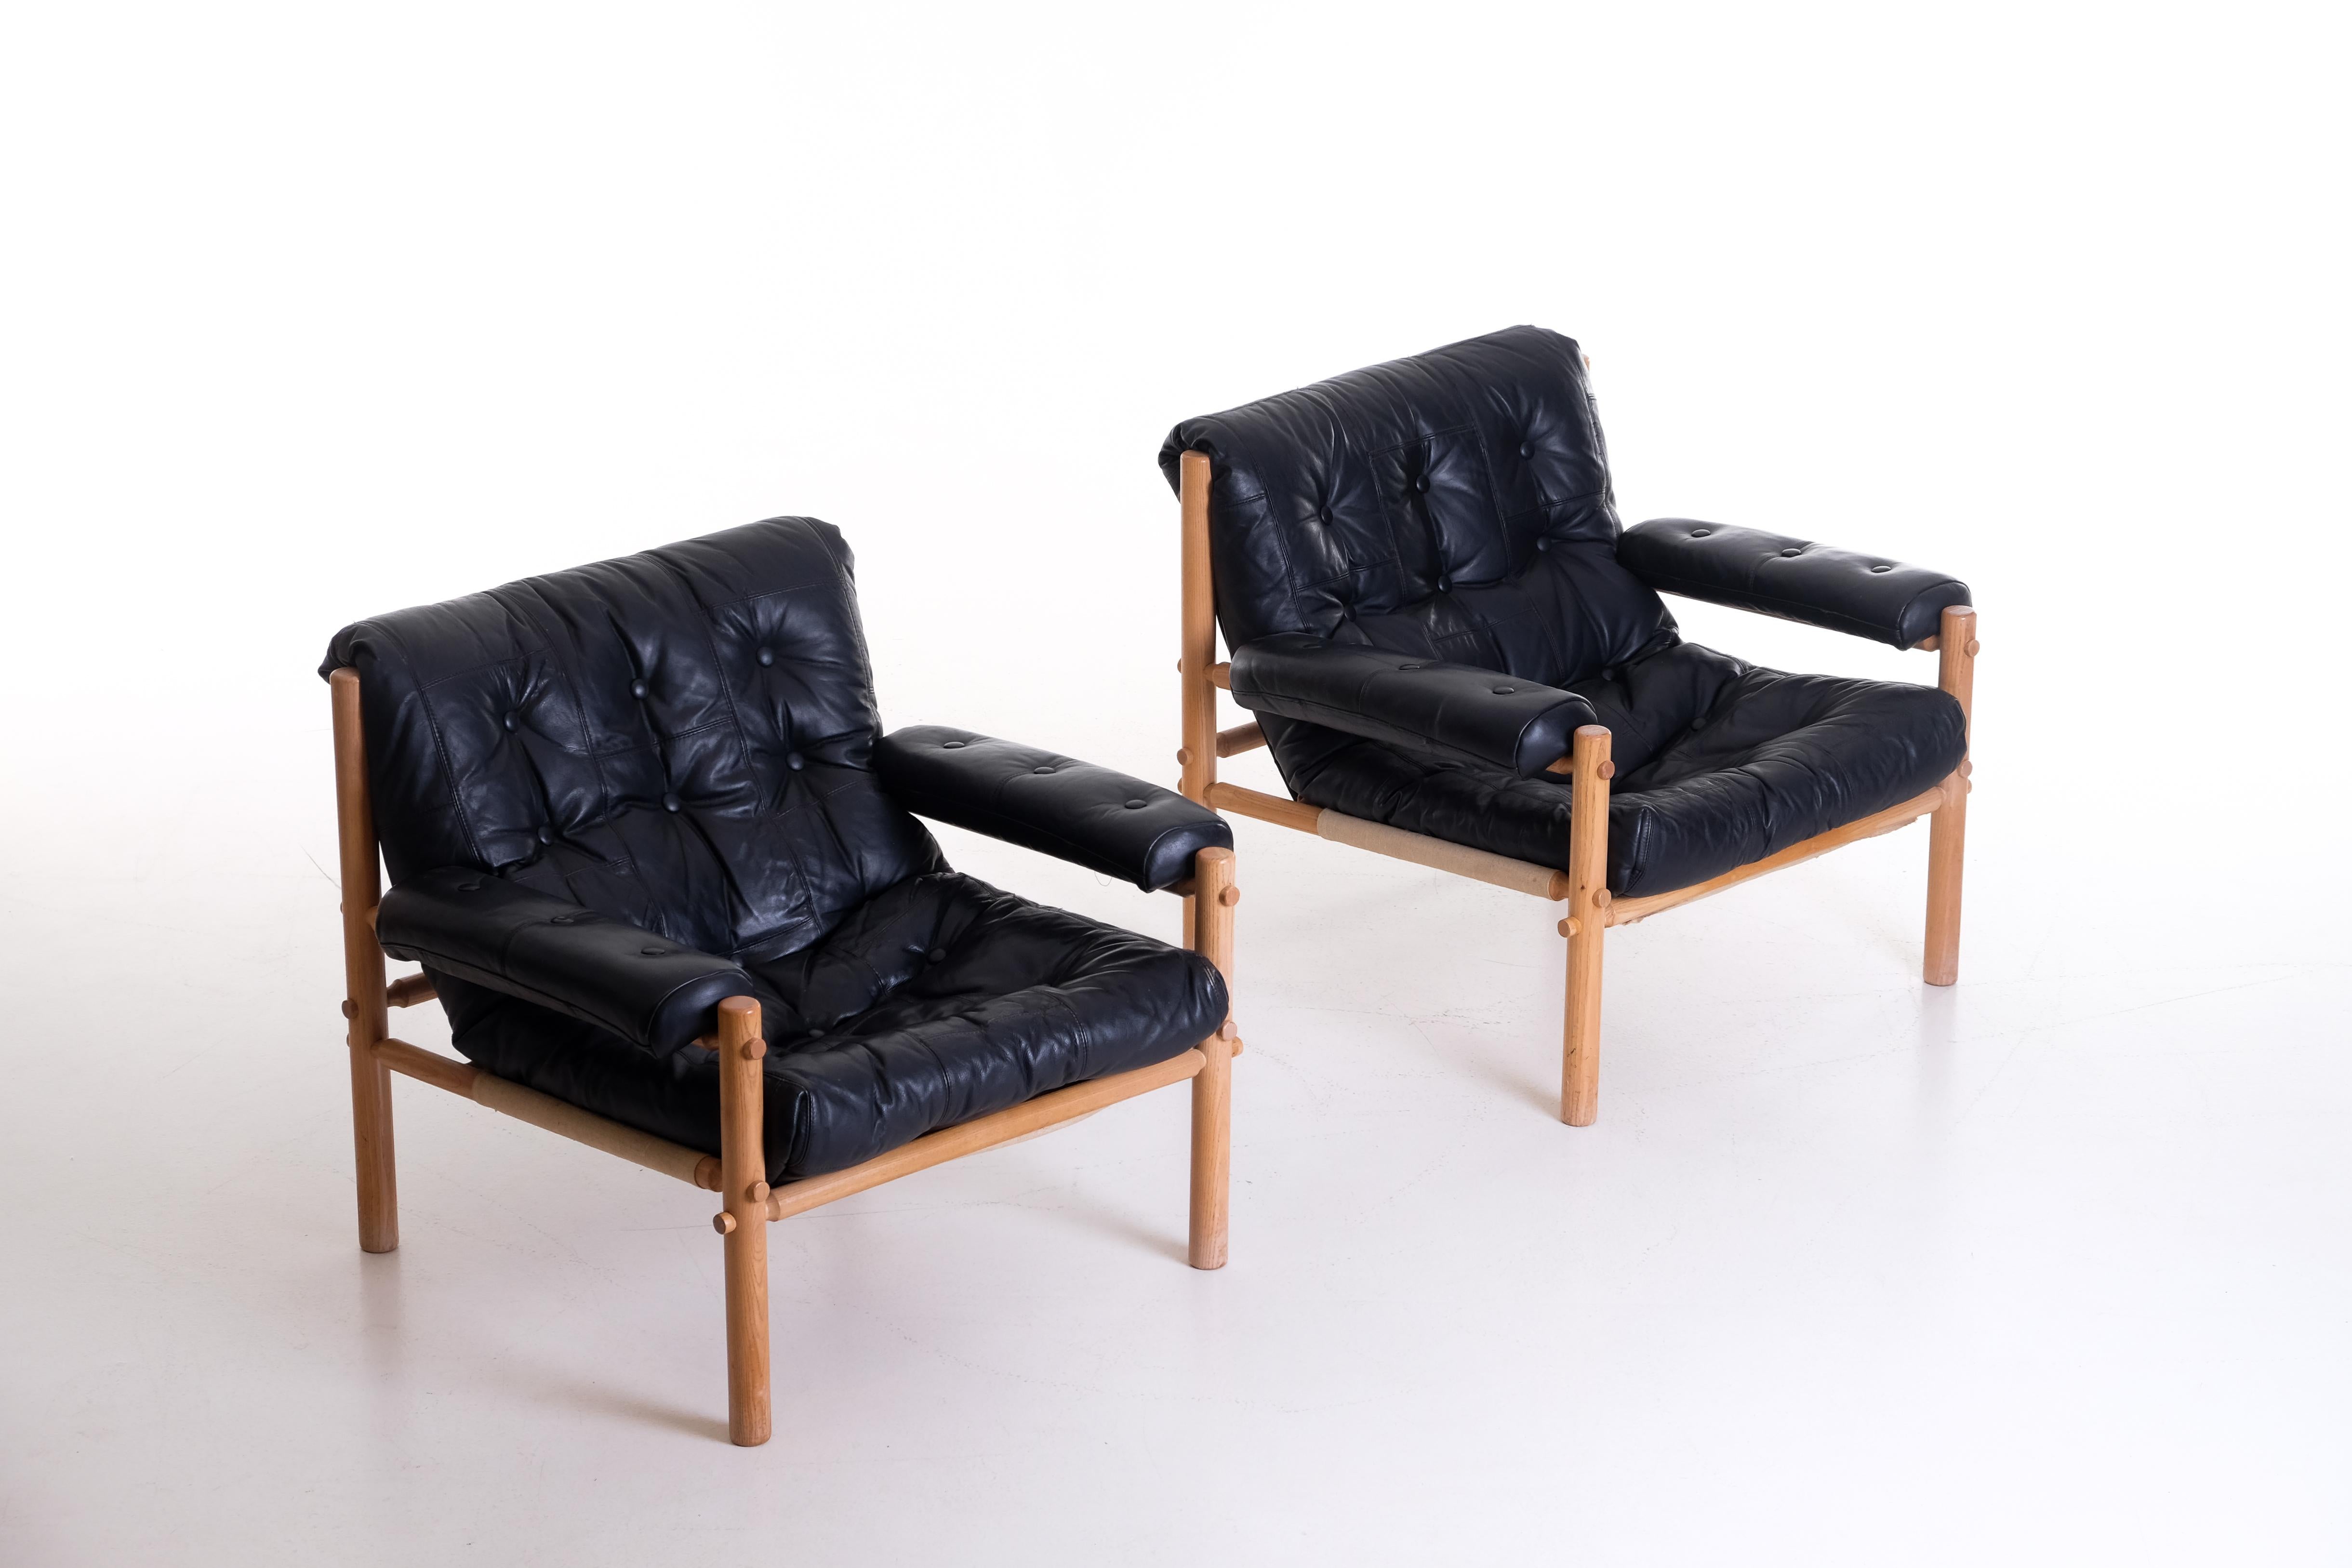 Pair of Swedish safari chairs / easy chairs with original black leather in good condition.
  




